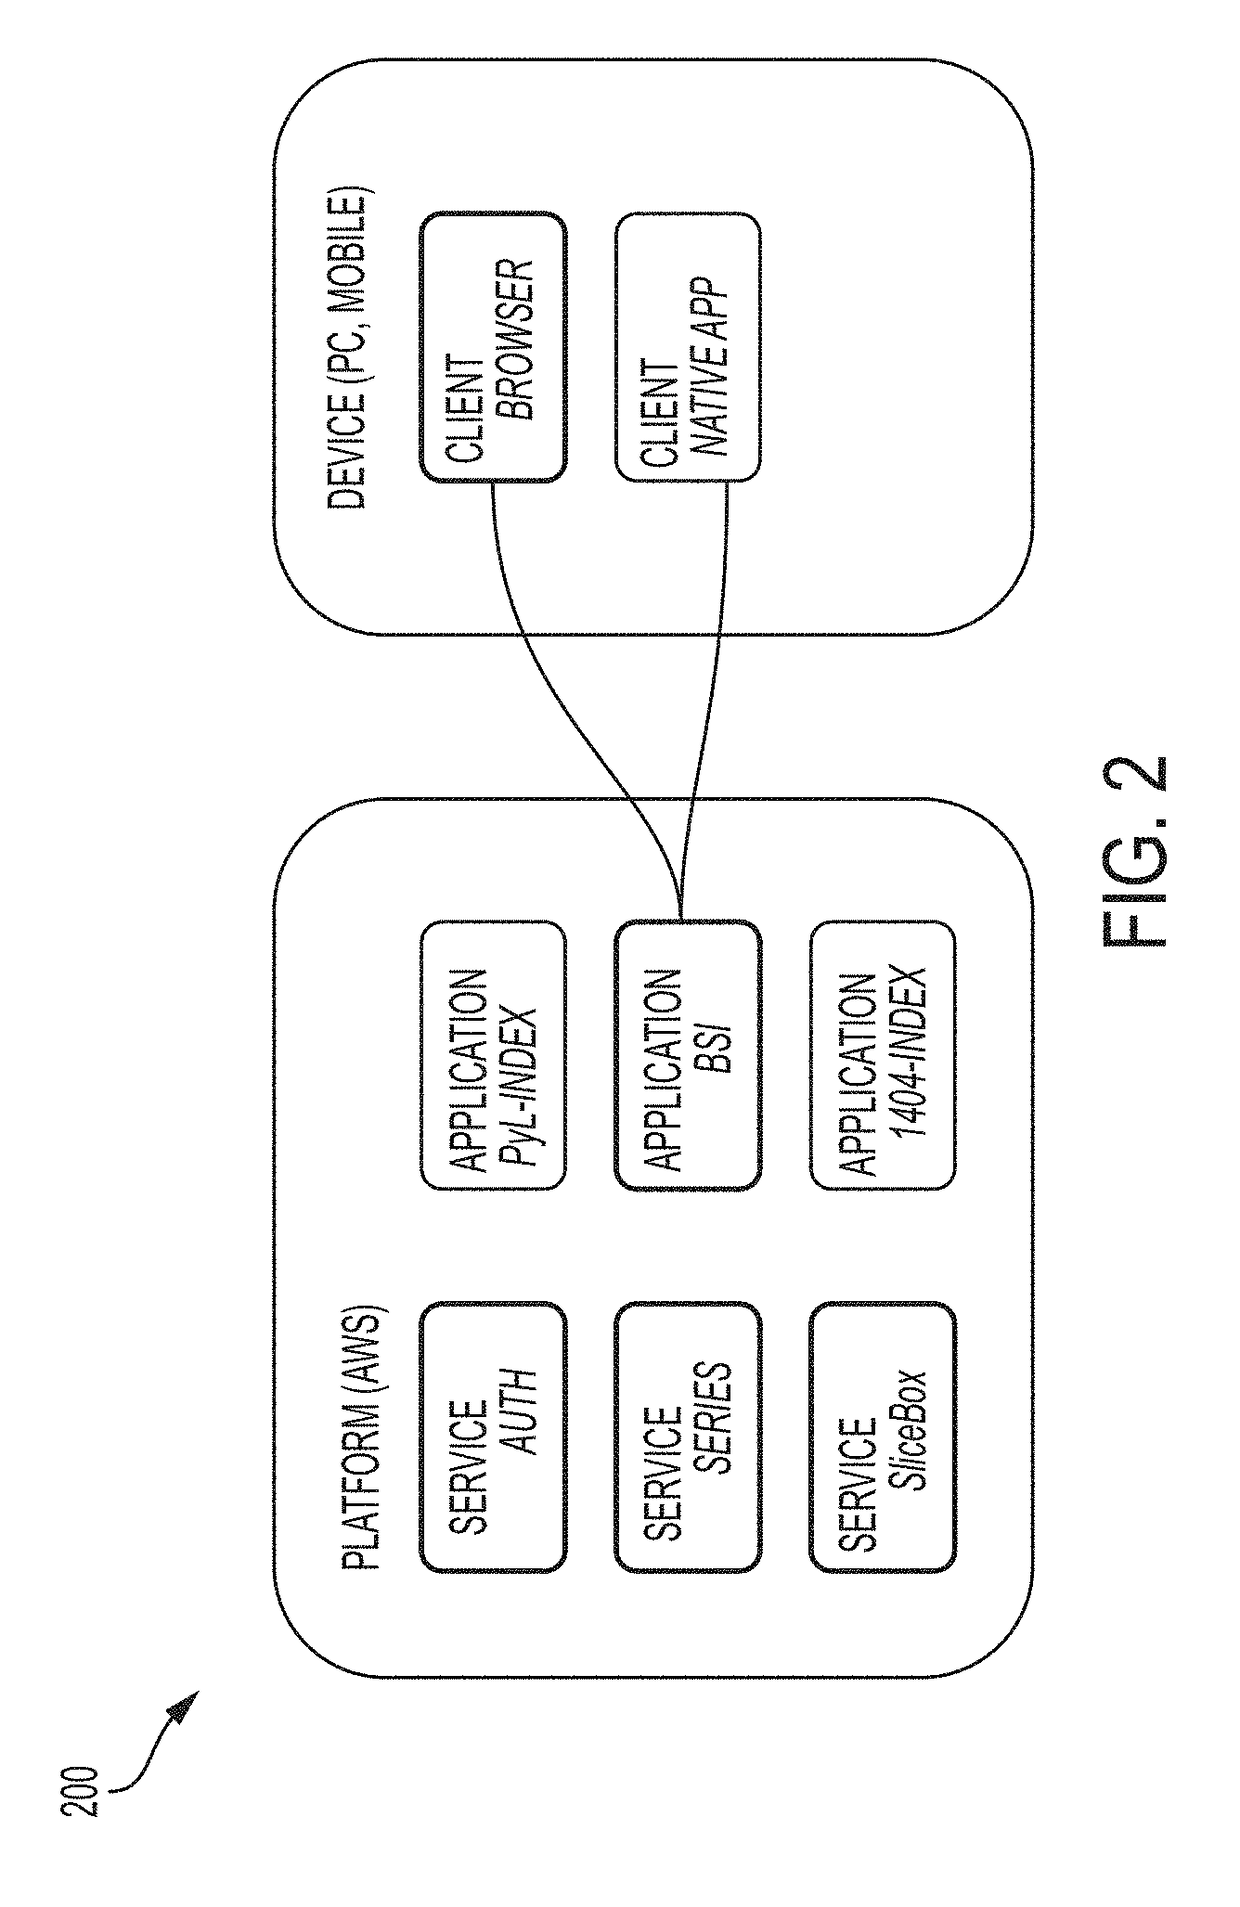 Network for medical image analysis, decision support system, and related graphical user interface (GUI) applications